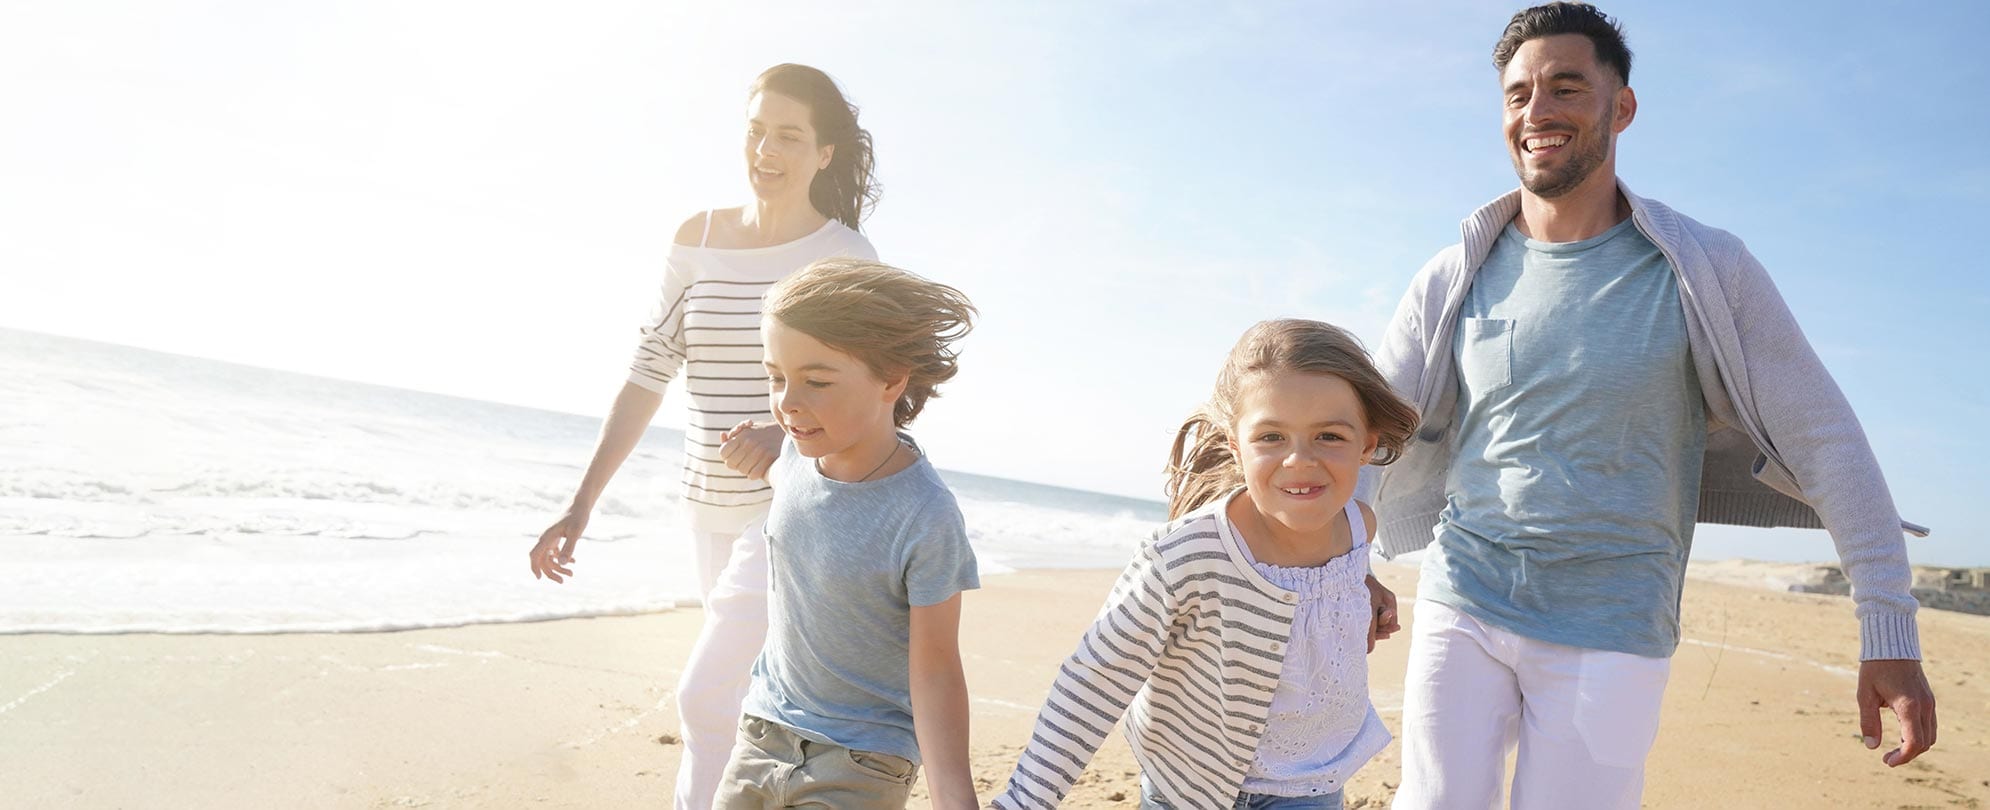 Happy family of four all holding hands while running on a beach shoreline 